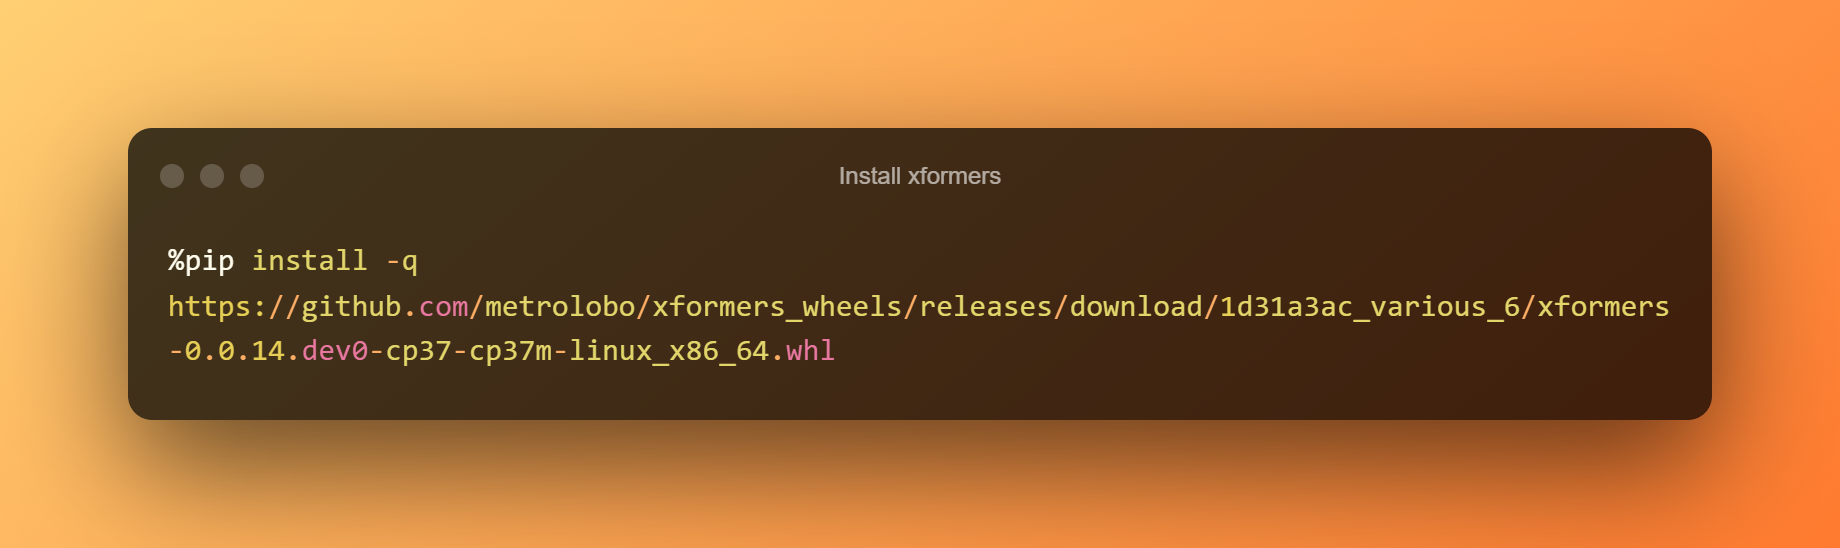 Install Xformers